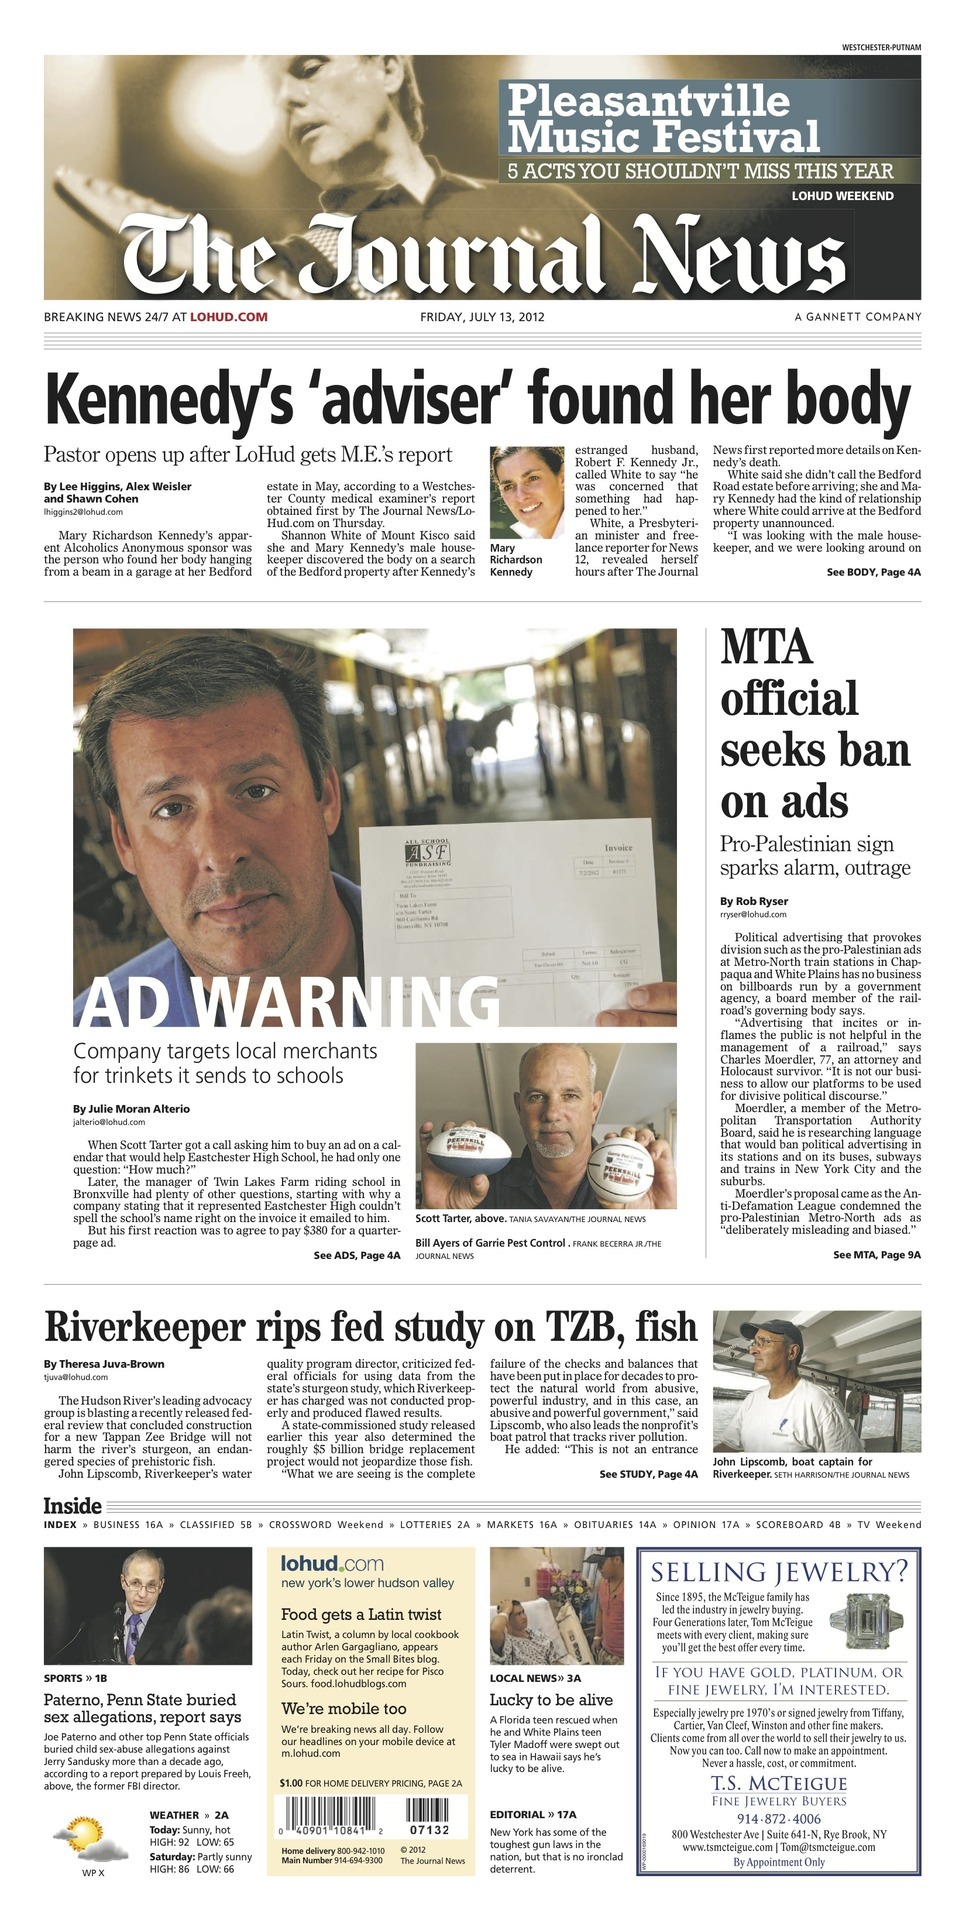 Page one headlines:
AD WARNING
Kennedy’s ‘adviser’ found her body
MTA official seeks ban on ads
Riverkeeper rips fed study on TZB, fish